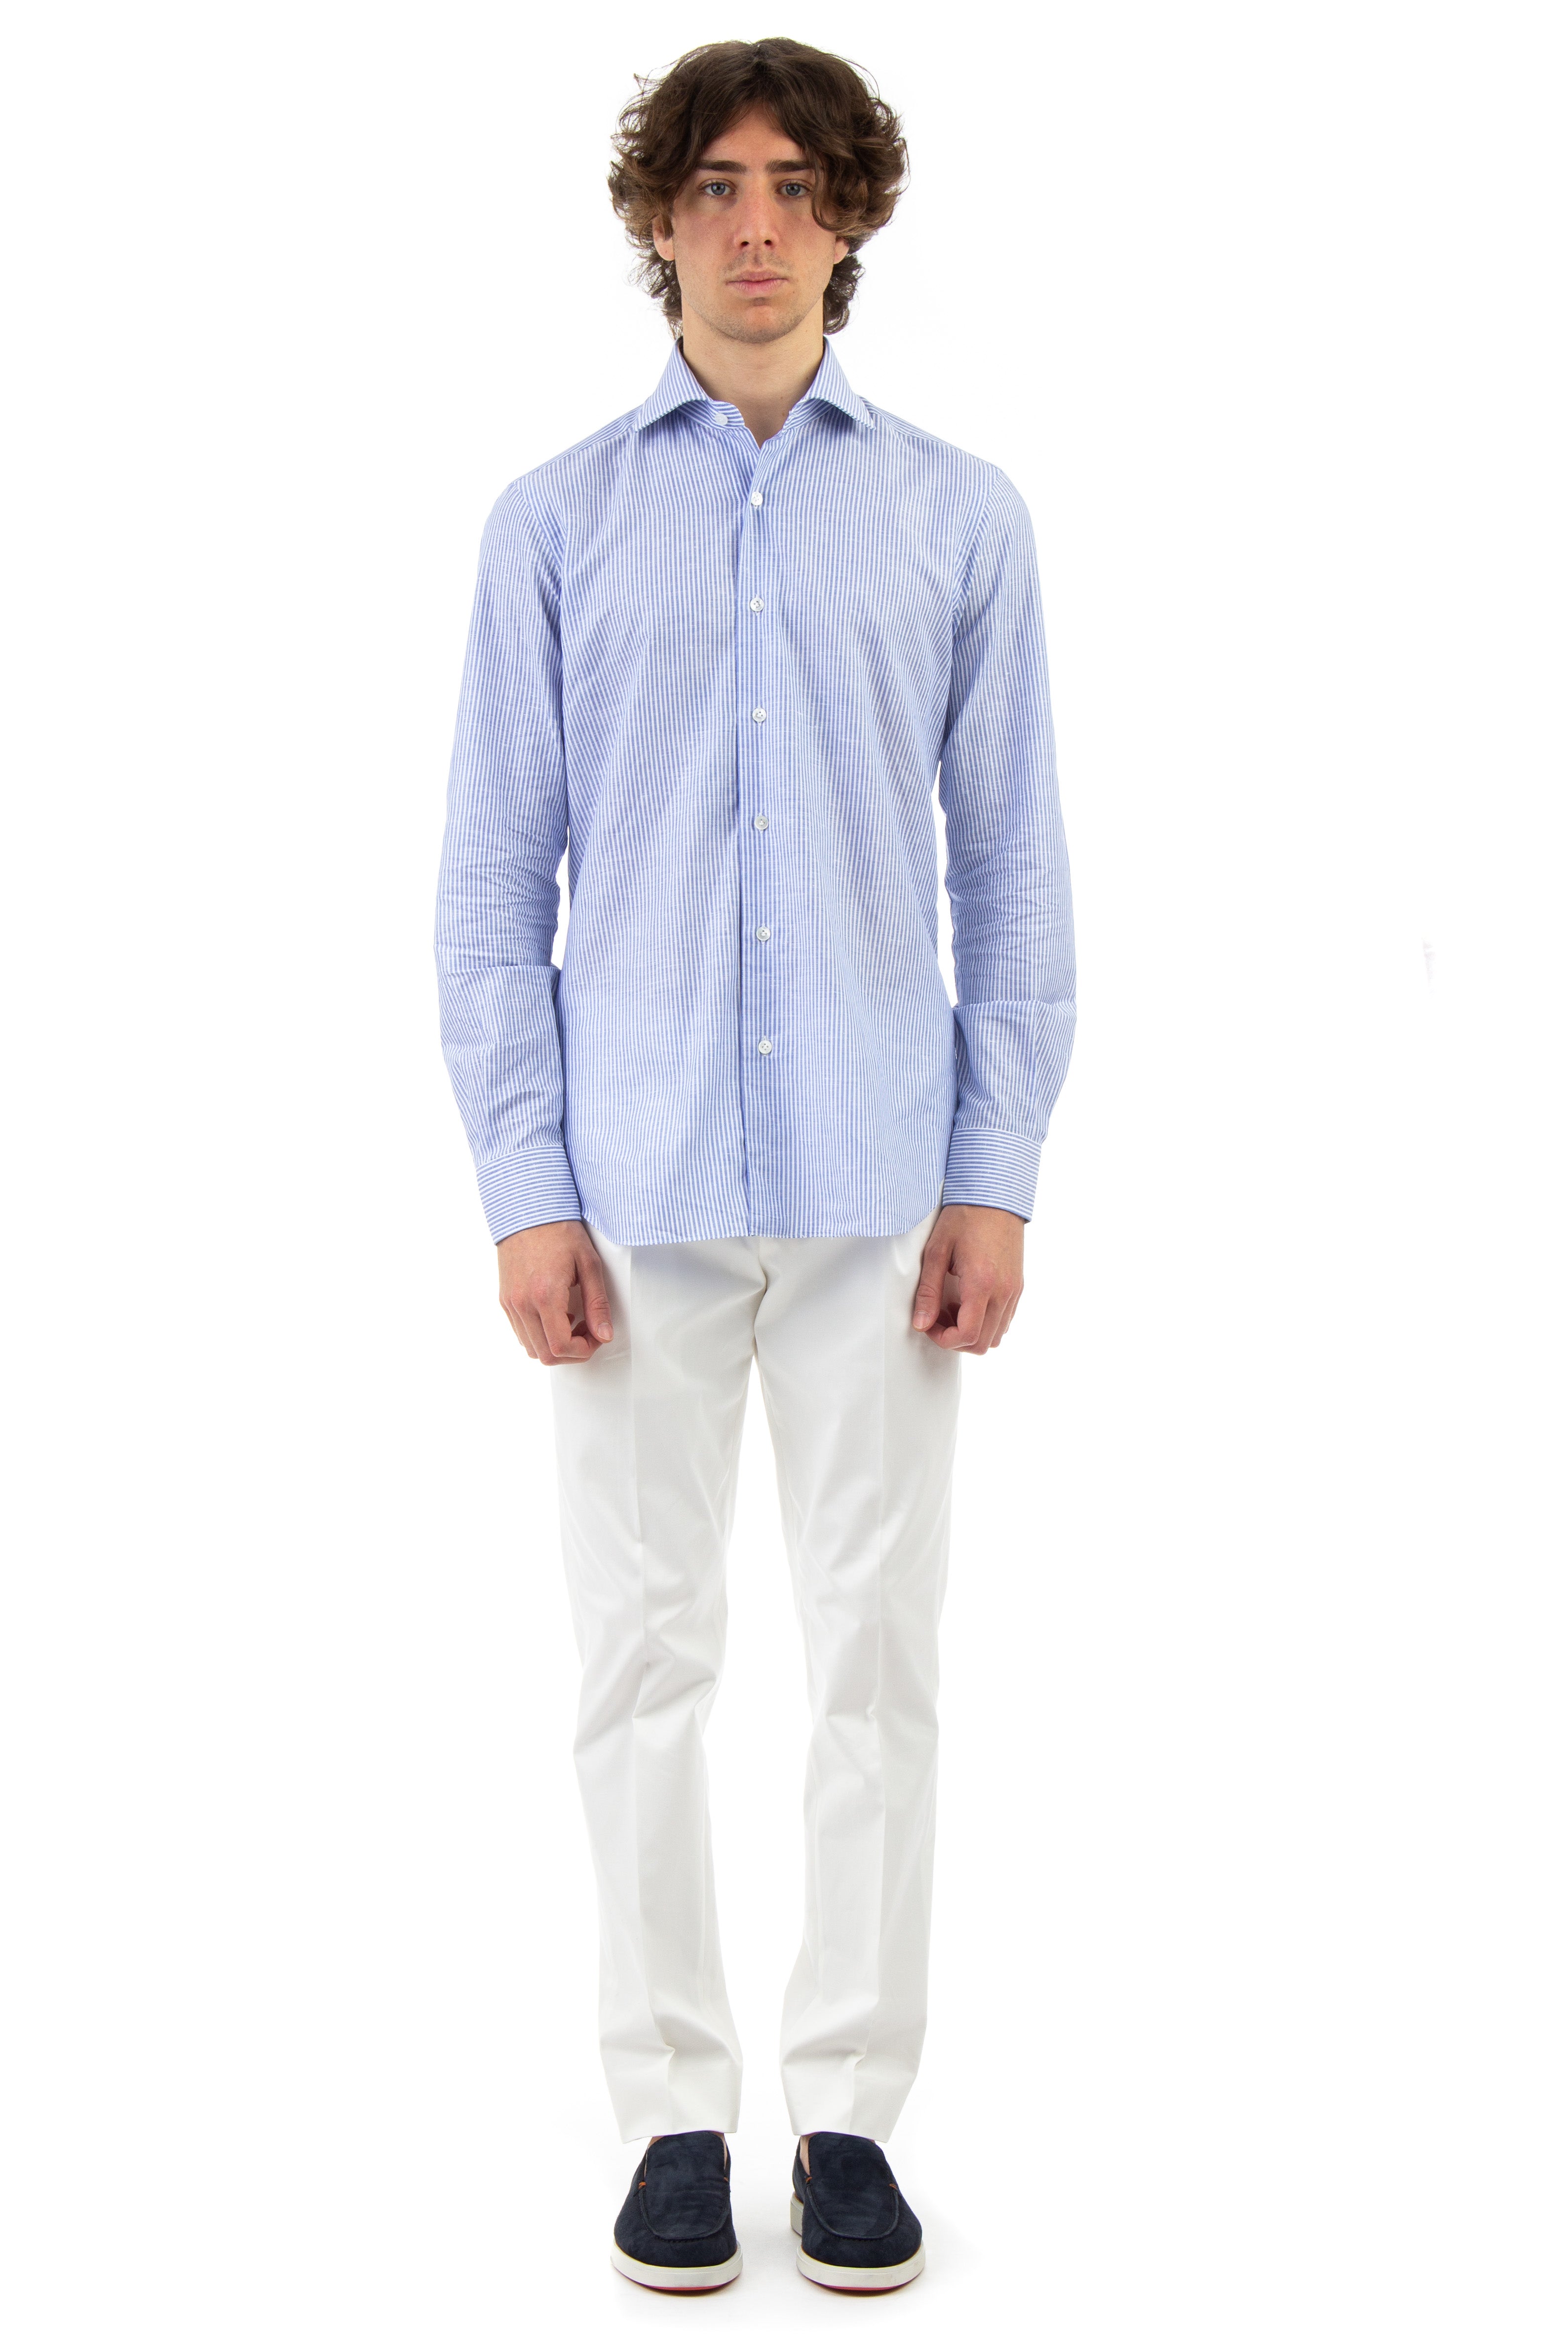 Tailored shirt in cotton-linen cult line